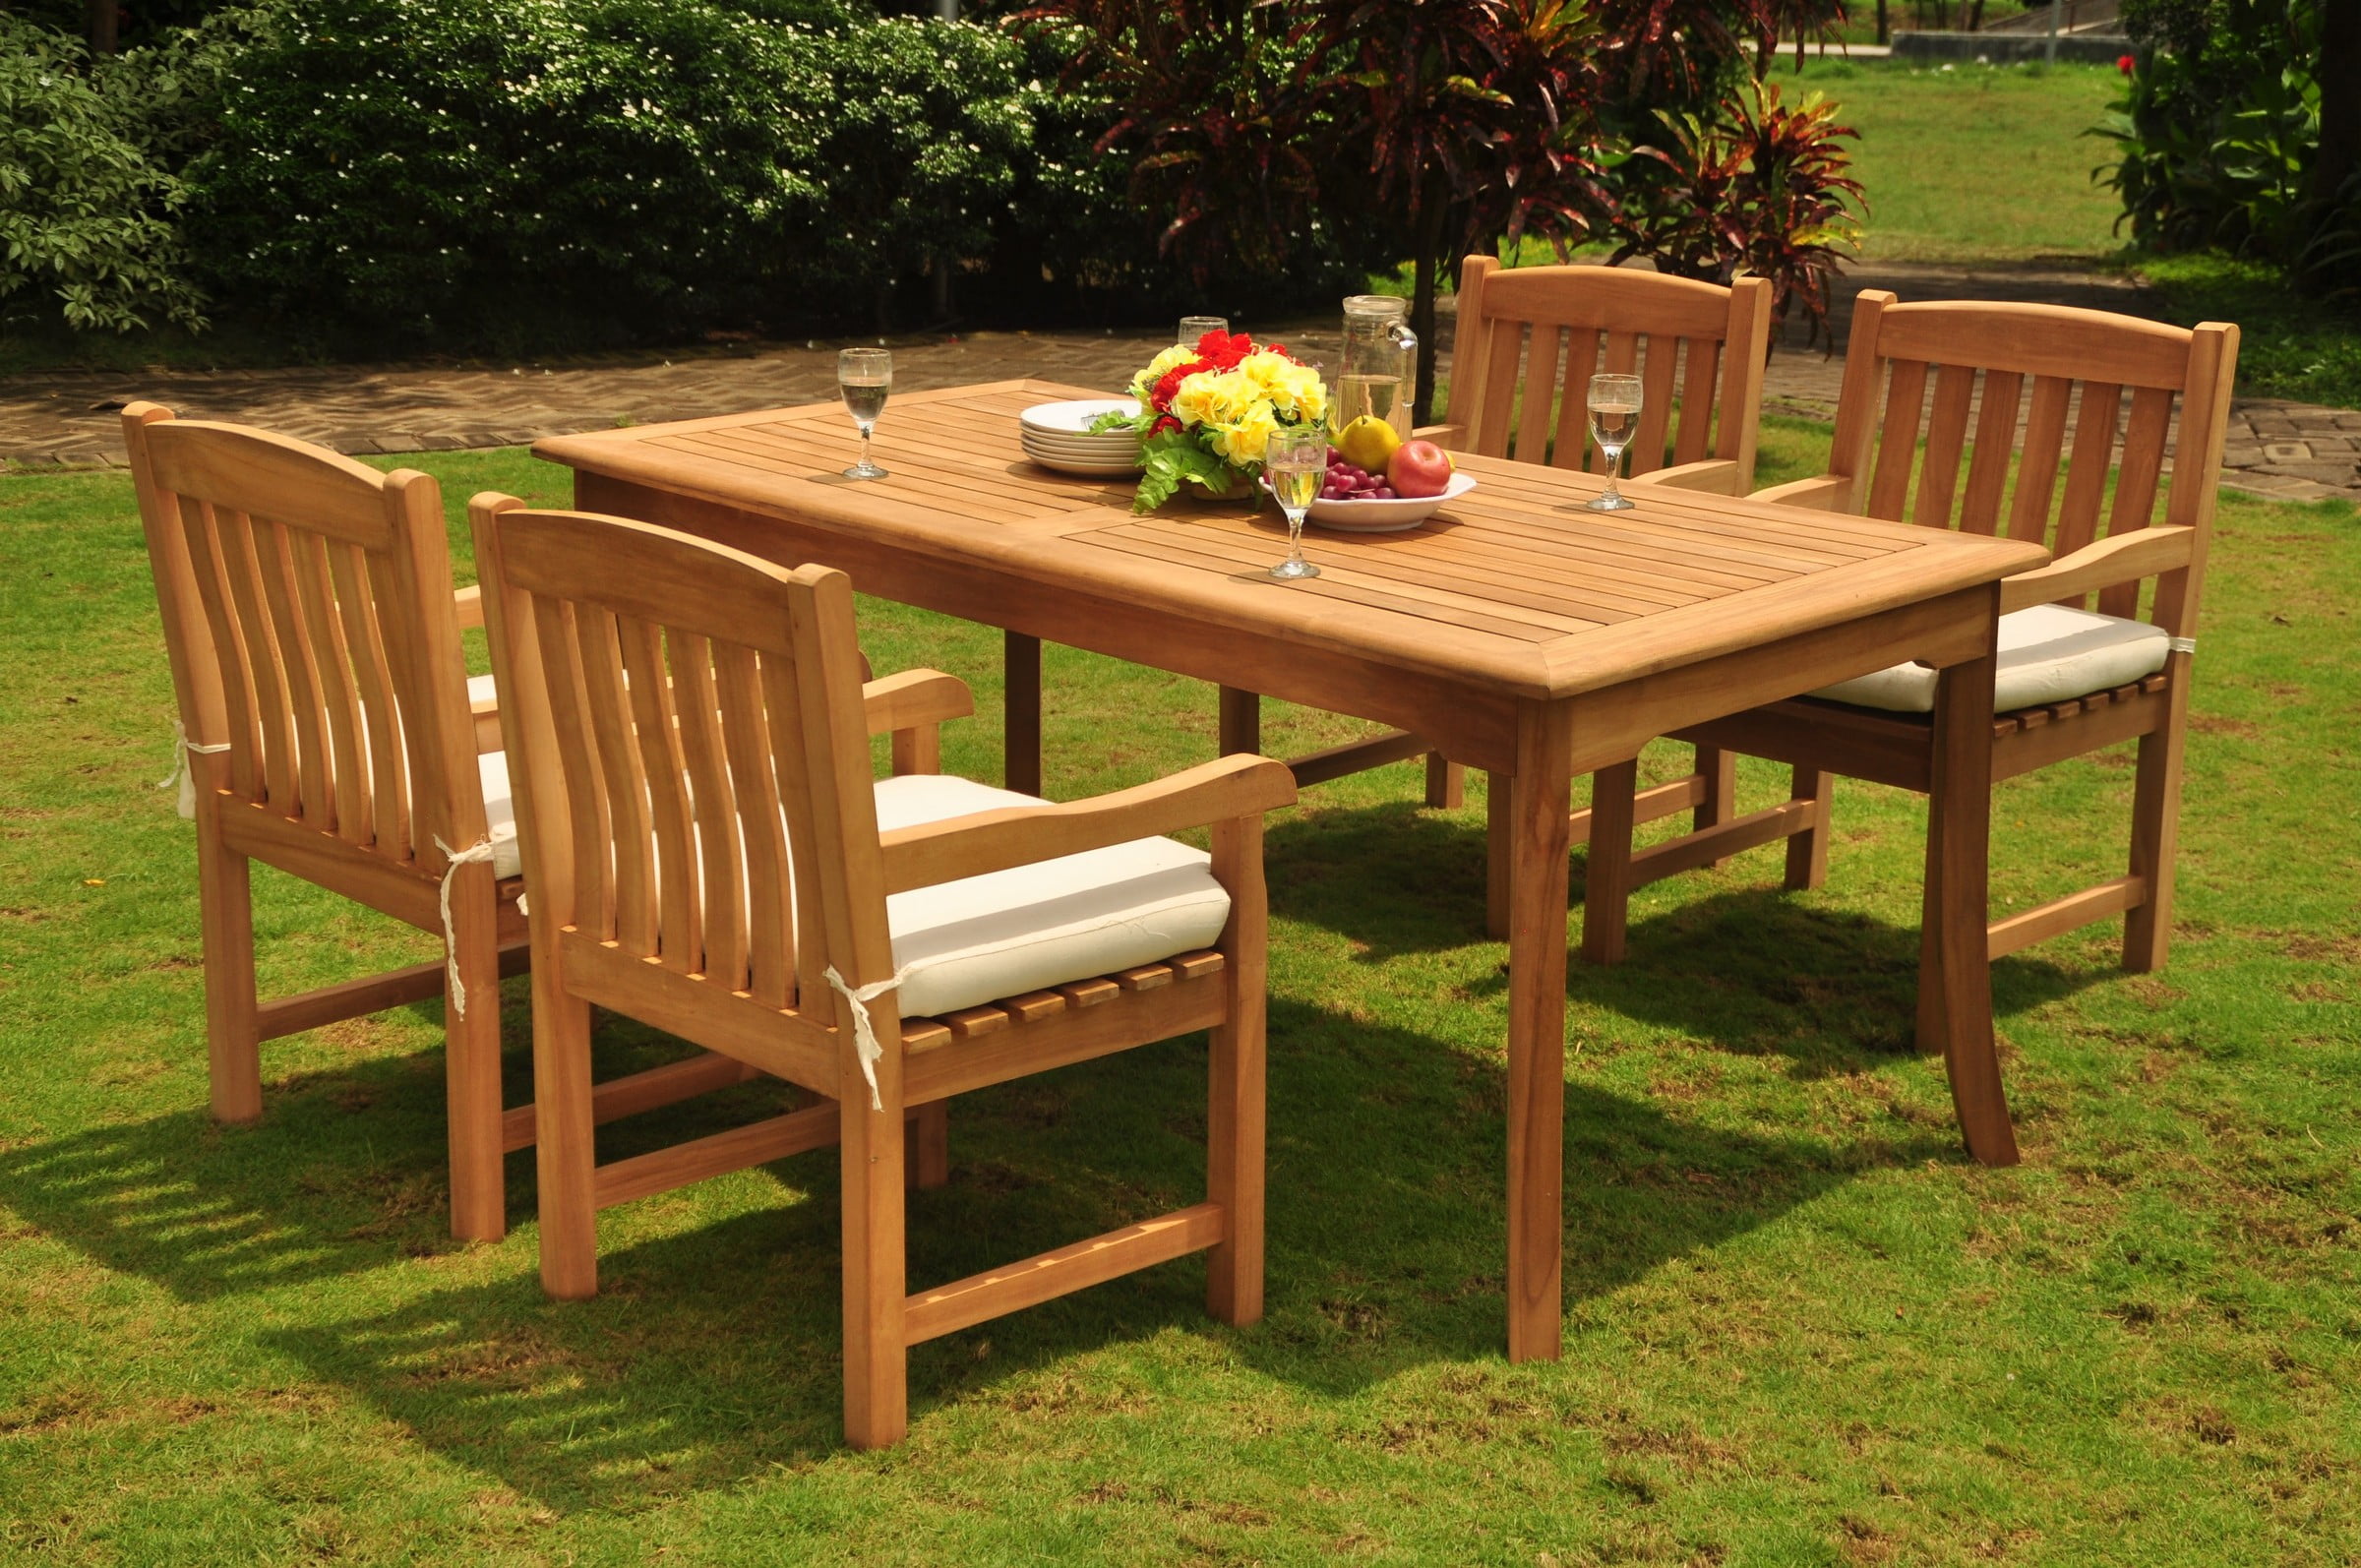 Teak Dining Table For Outdoor Use: Enjoy Alfresco Dining